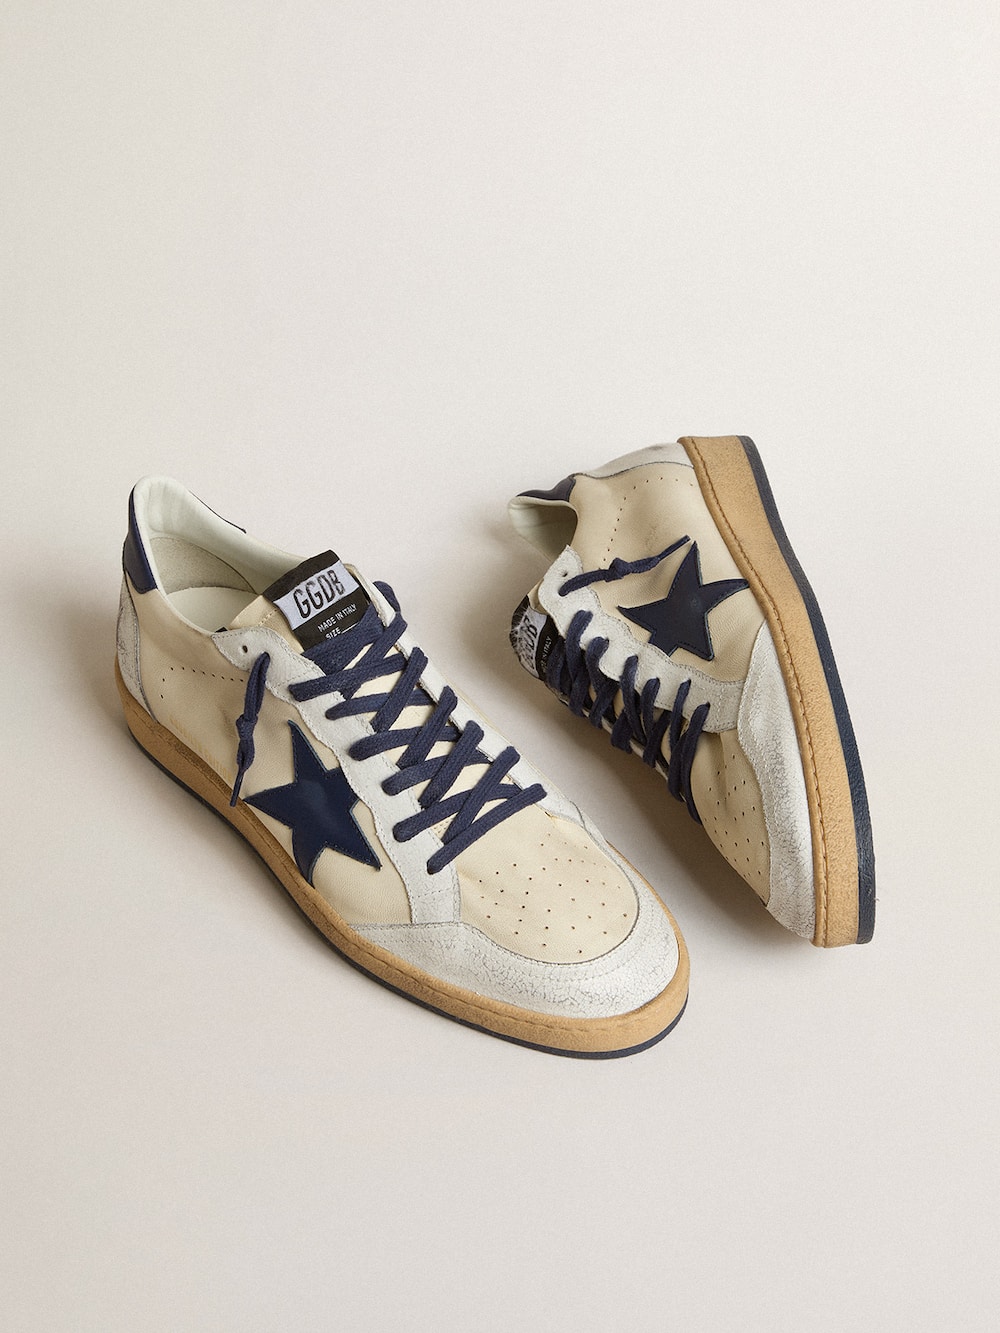 Golden Goose - Men's Ball Star LTD in cream nappa with blue leather star and heel tab in 